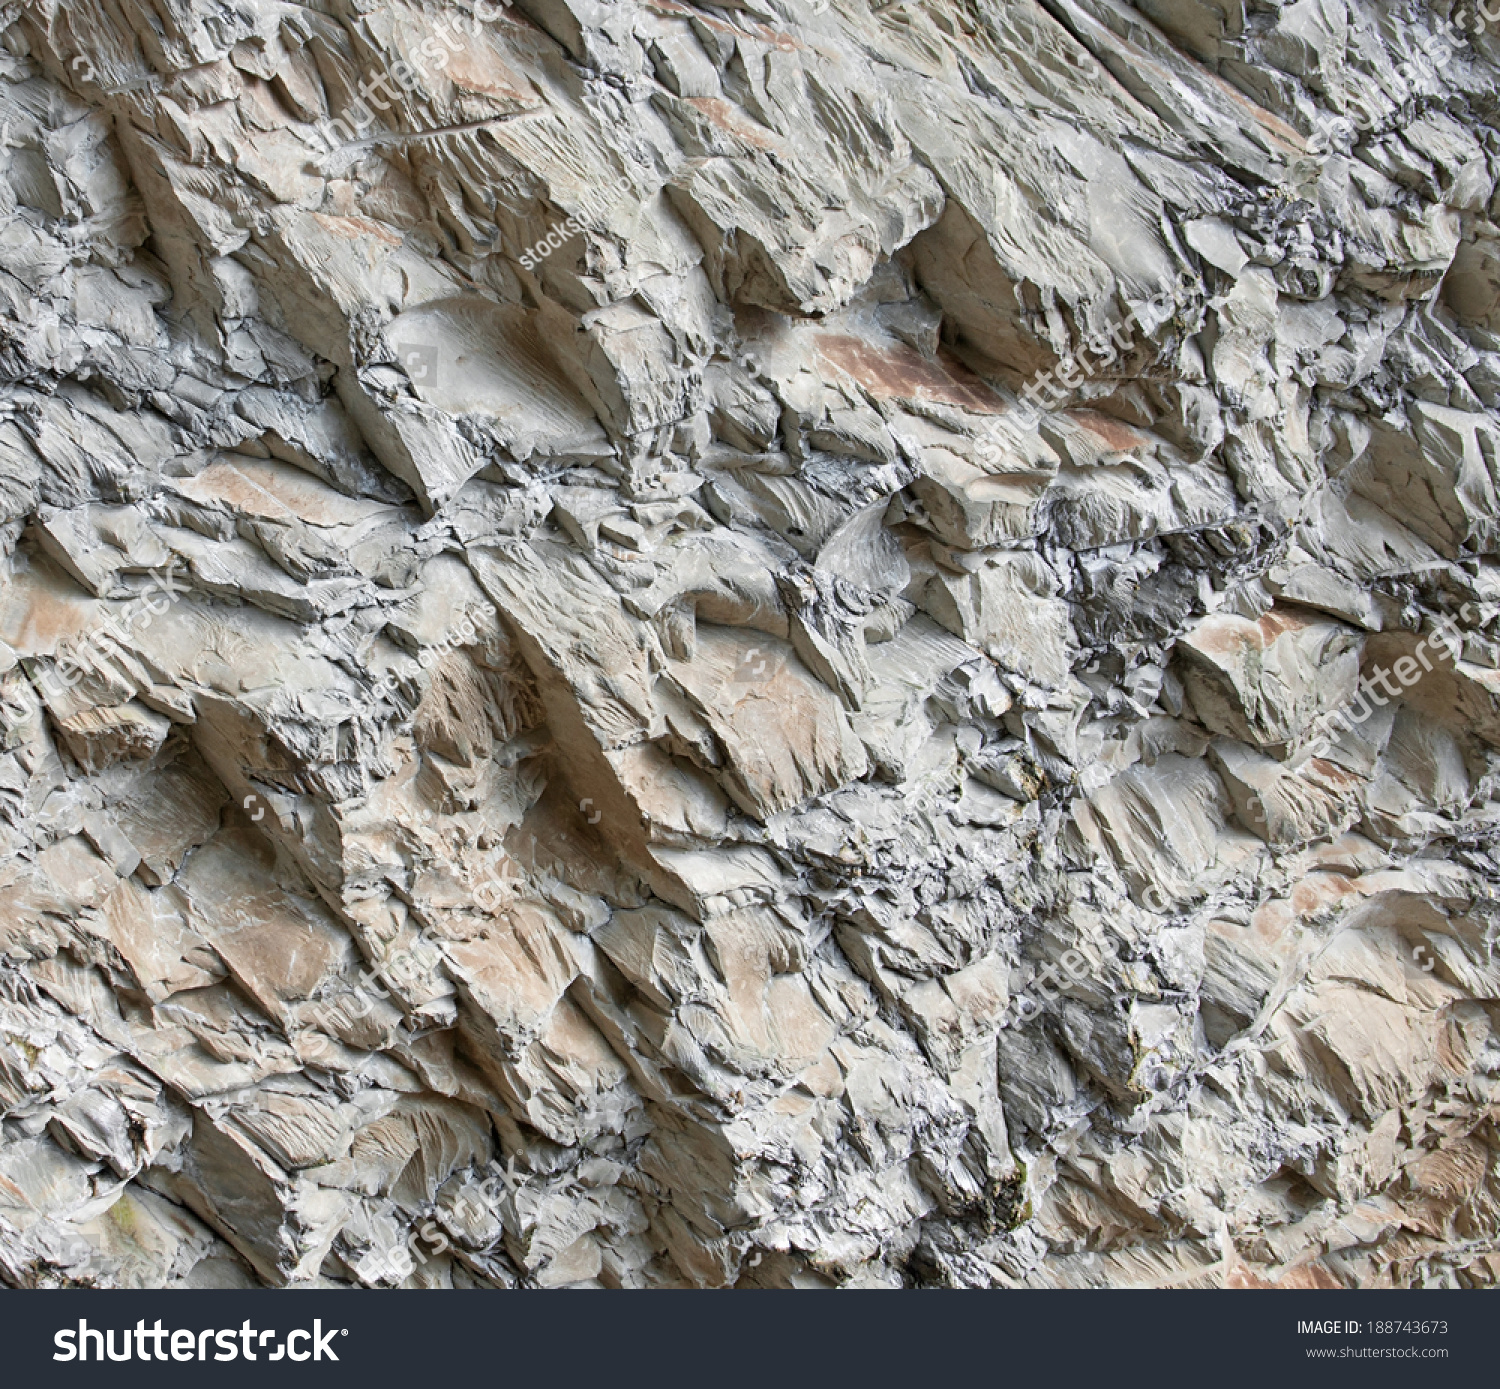 Quarry Blasted Rock Face Background Texture Stock Photo (Royalty ...